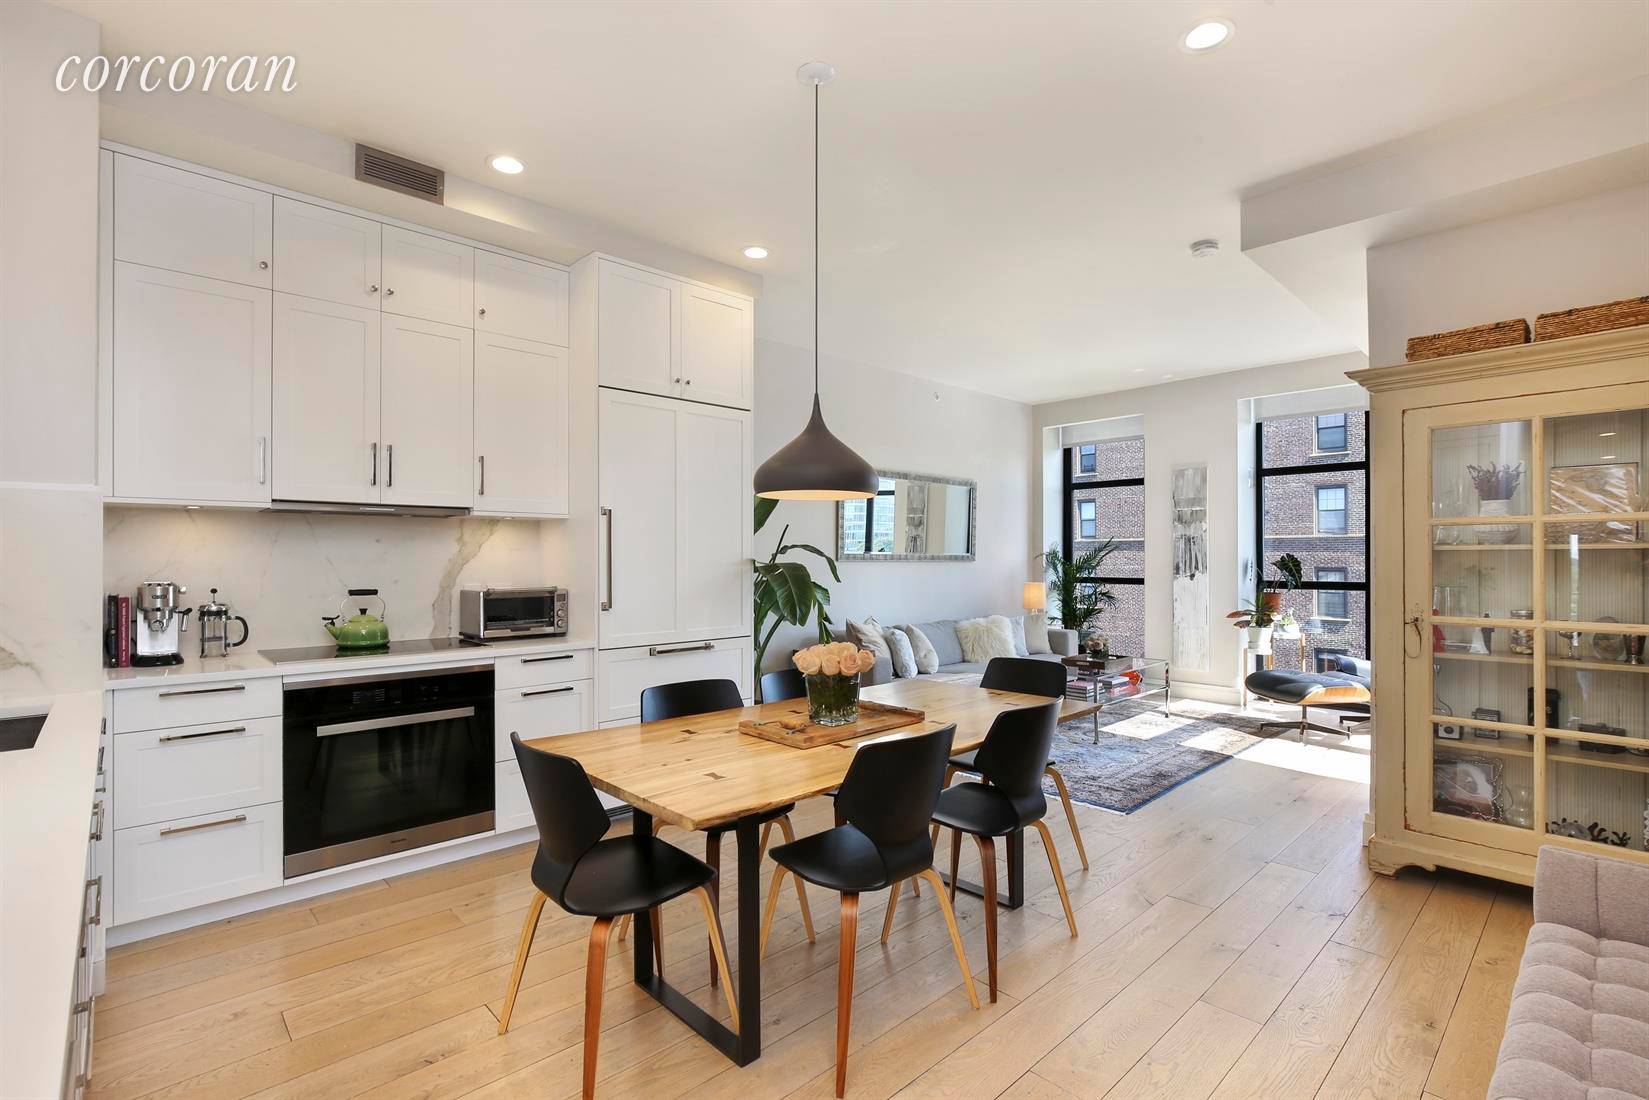 Beyond Perfection... This exquisite Center Park Slope Condominium offers Location, Convenience, Ease of Living and Luxury.